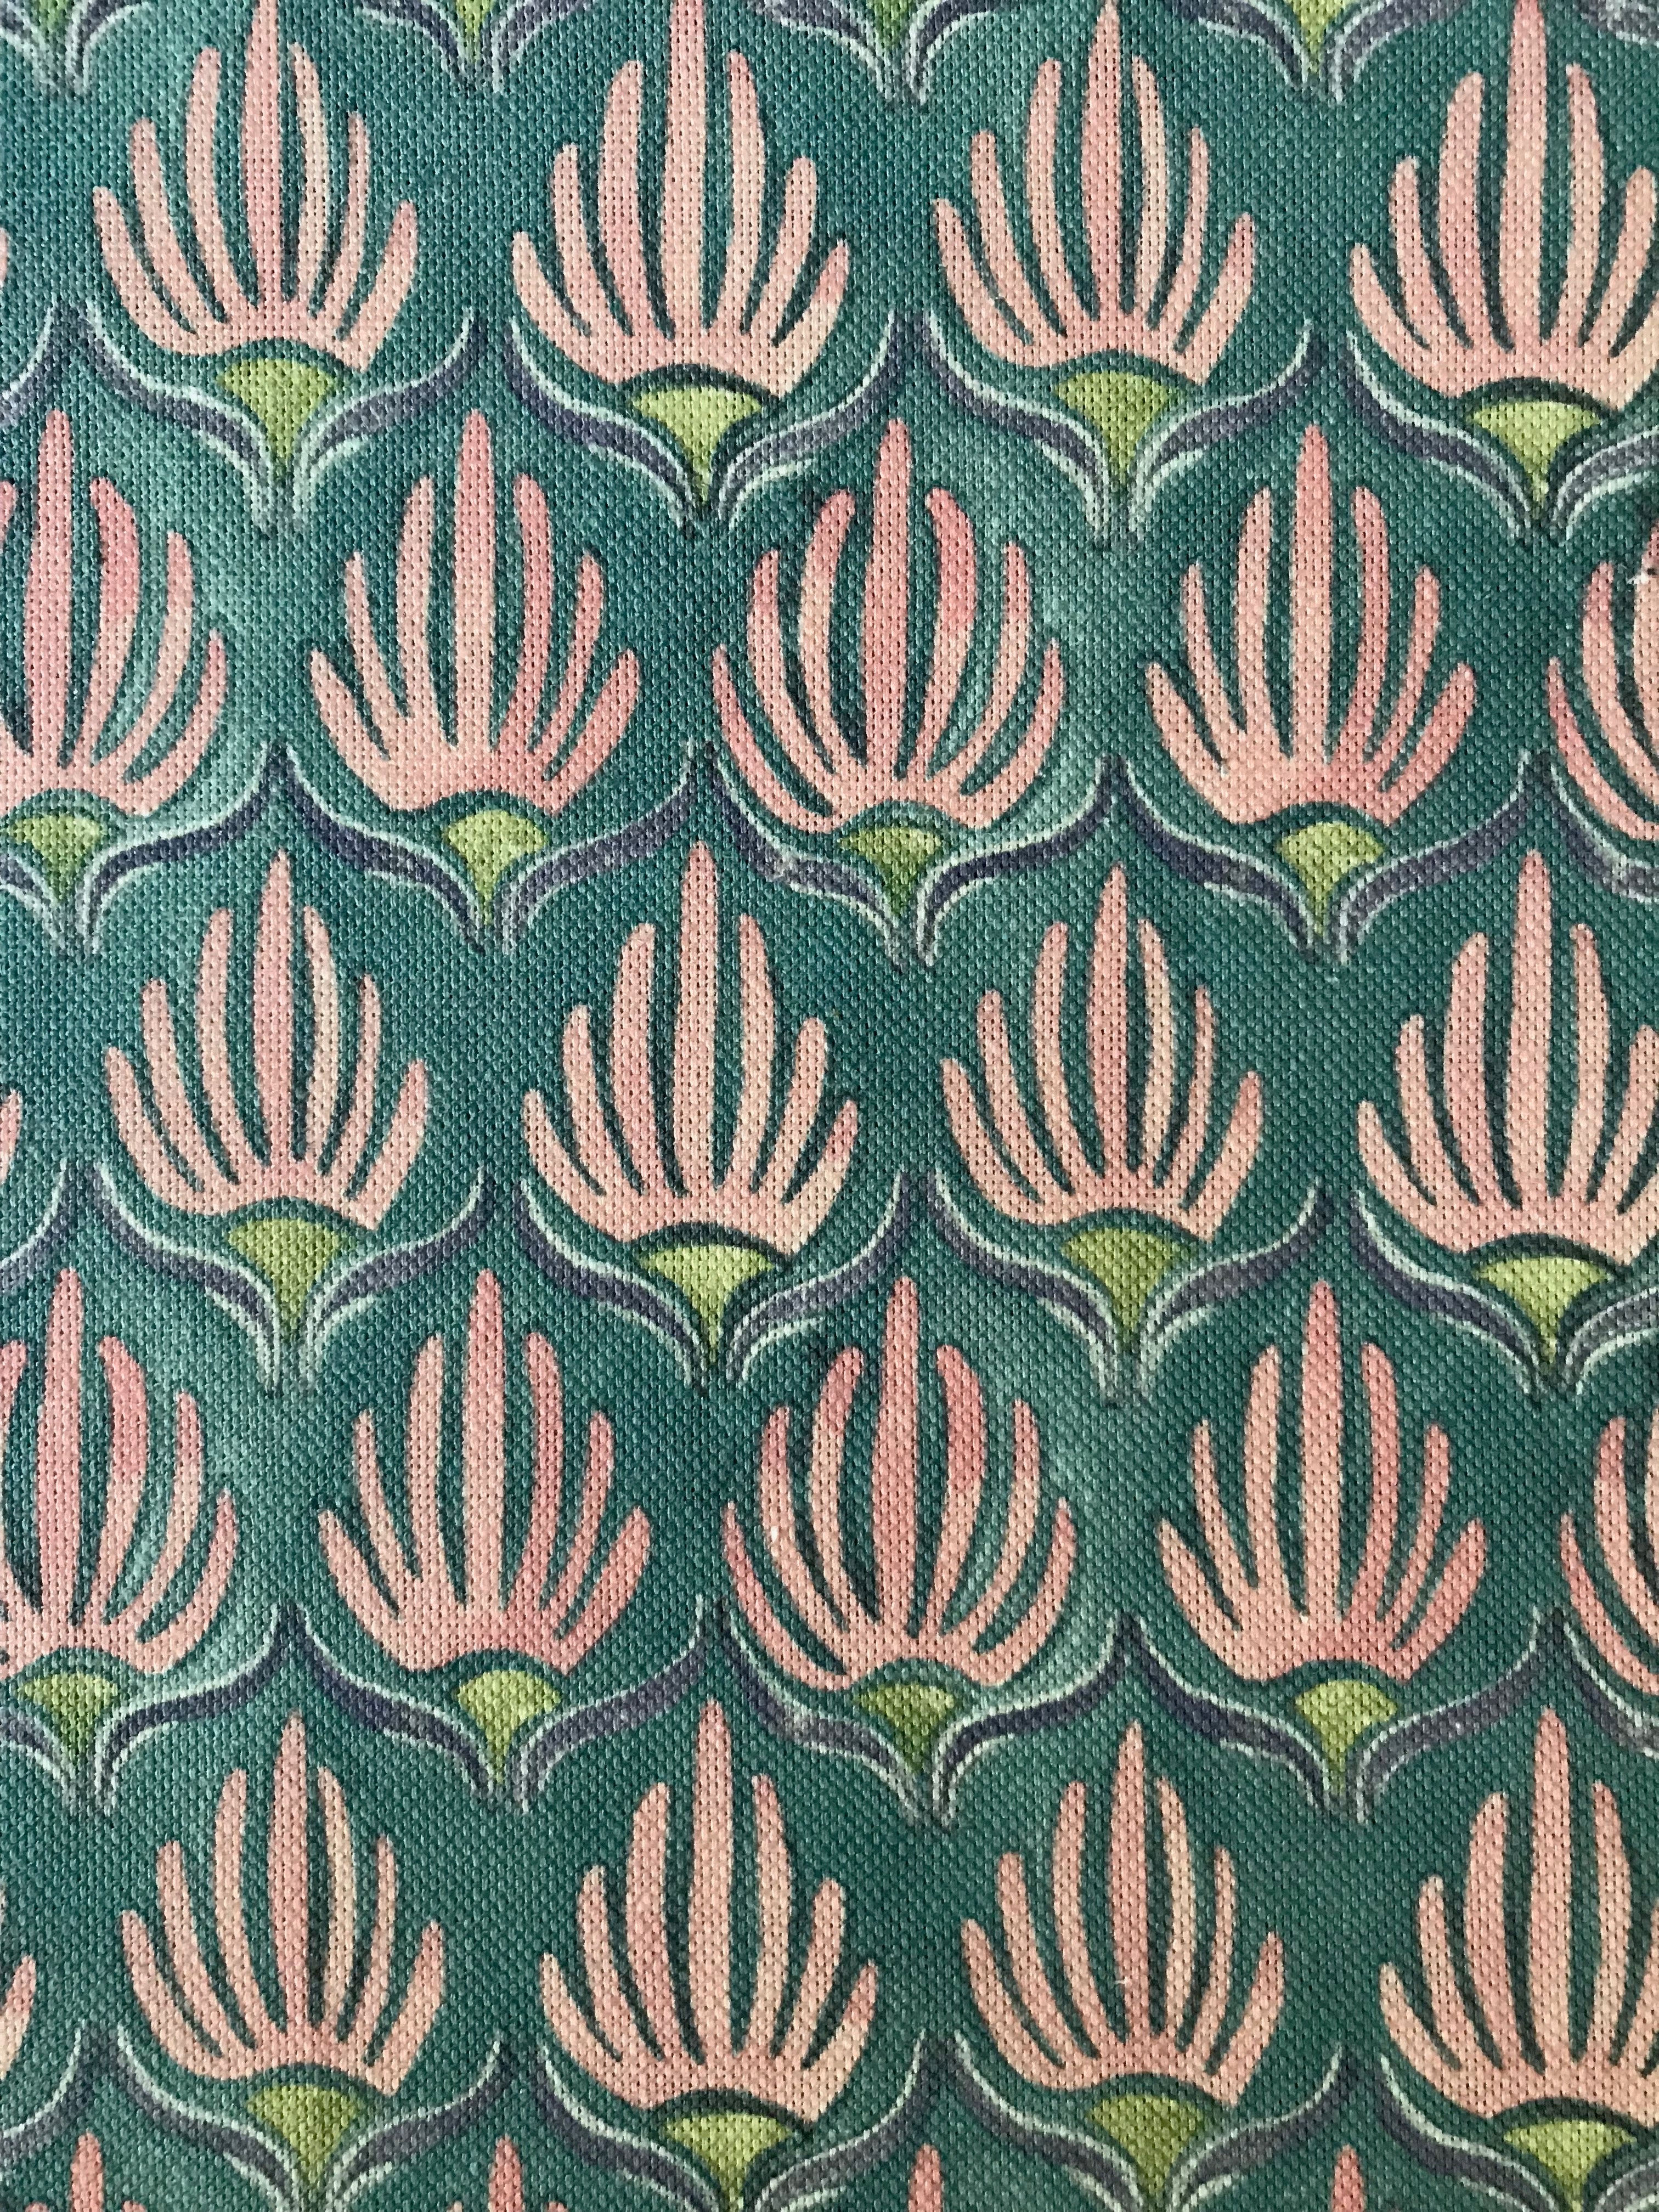 tulips jade fabric, pink motif on a jade coloured background, block print inspired